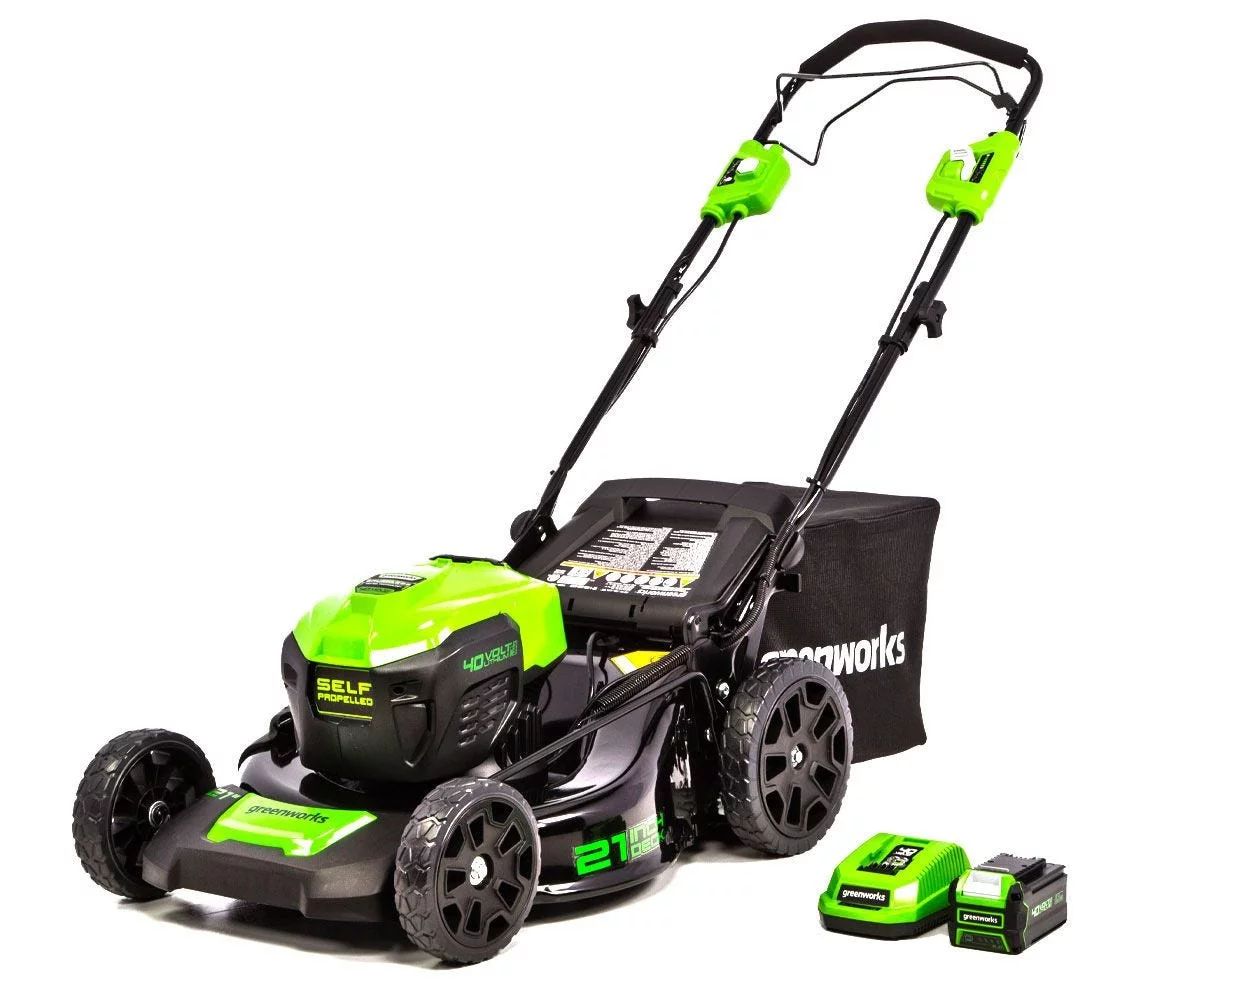 Greenworks 40V 21-inch Brushless Self-Propelled Lawn Mower W/5.0 Ah Battery and Charger, 2516402 | Walmart (US)